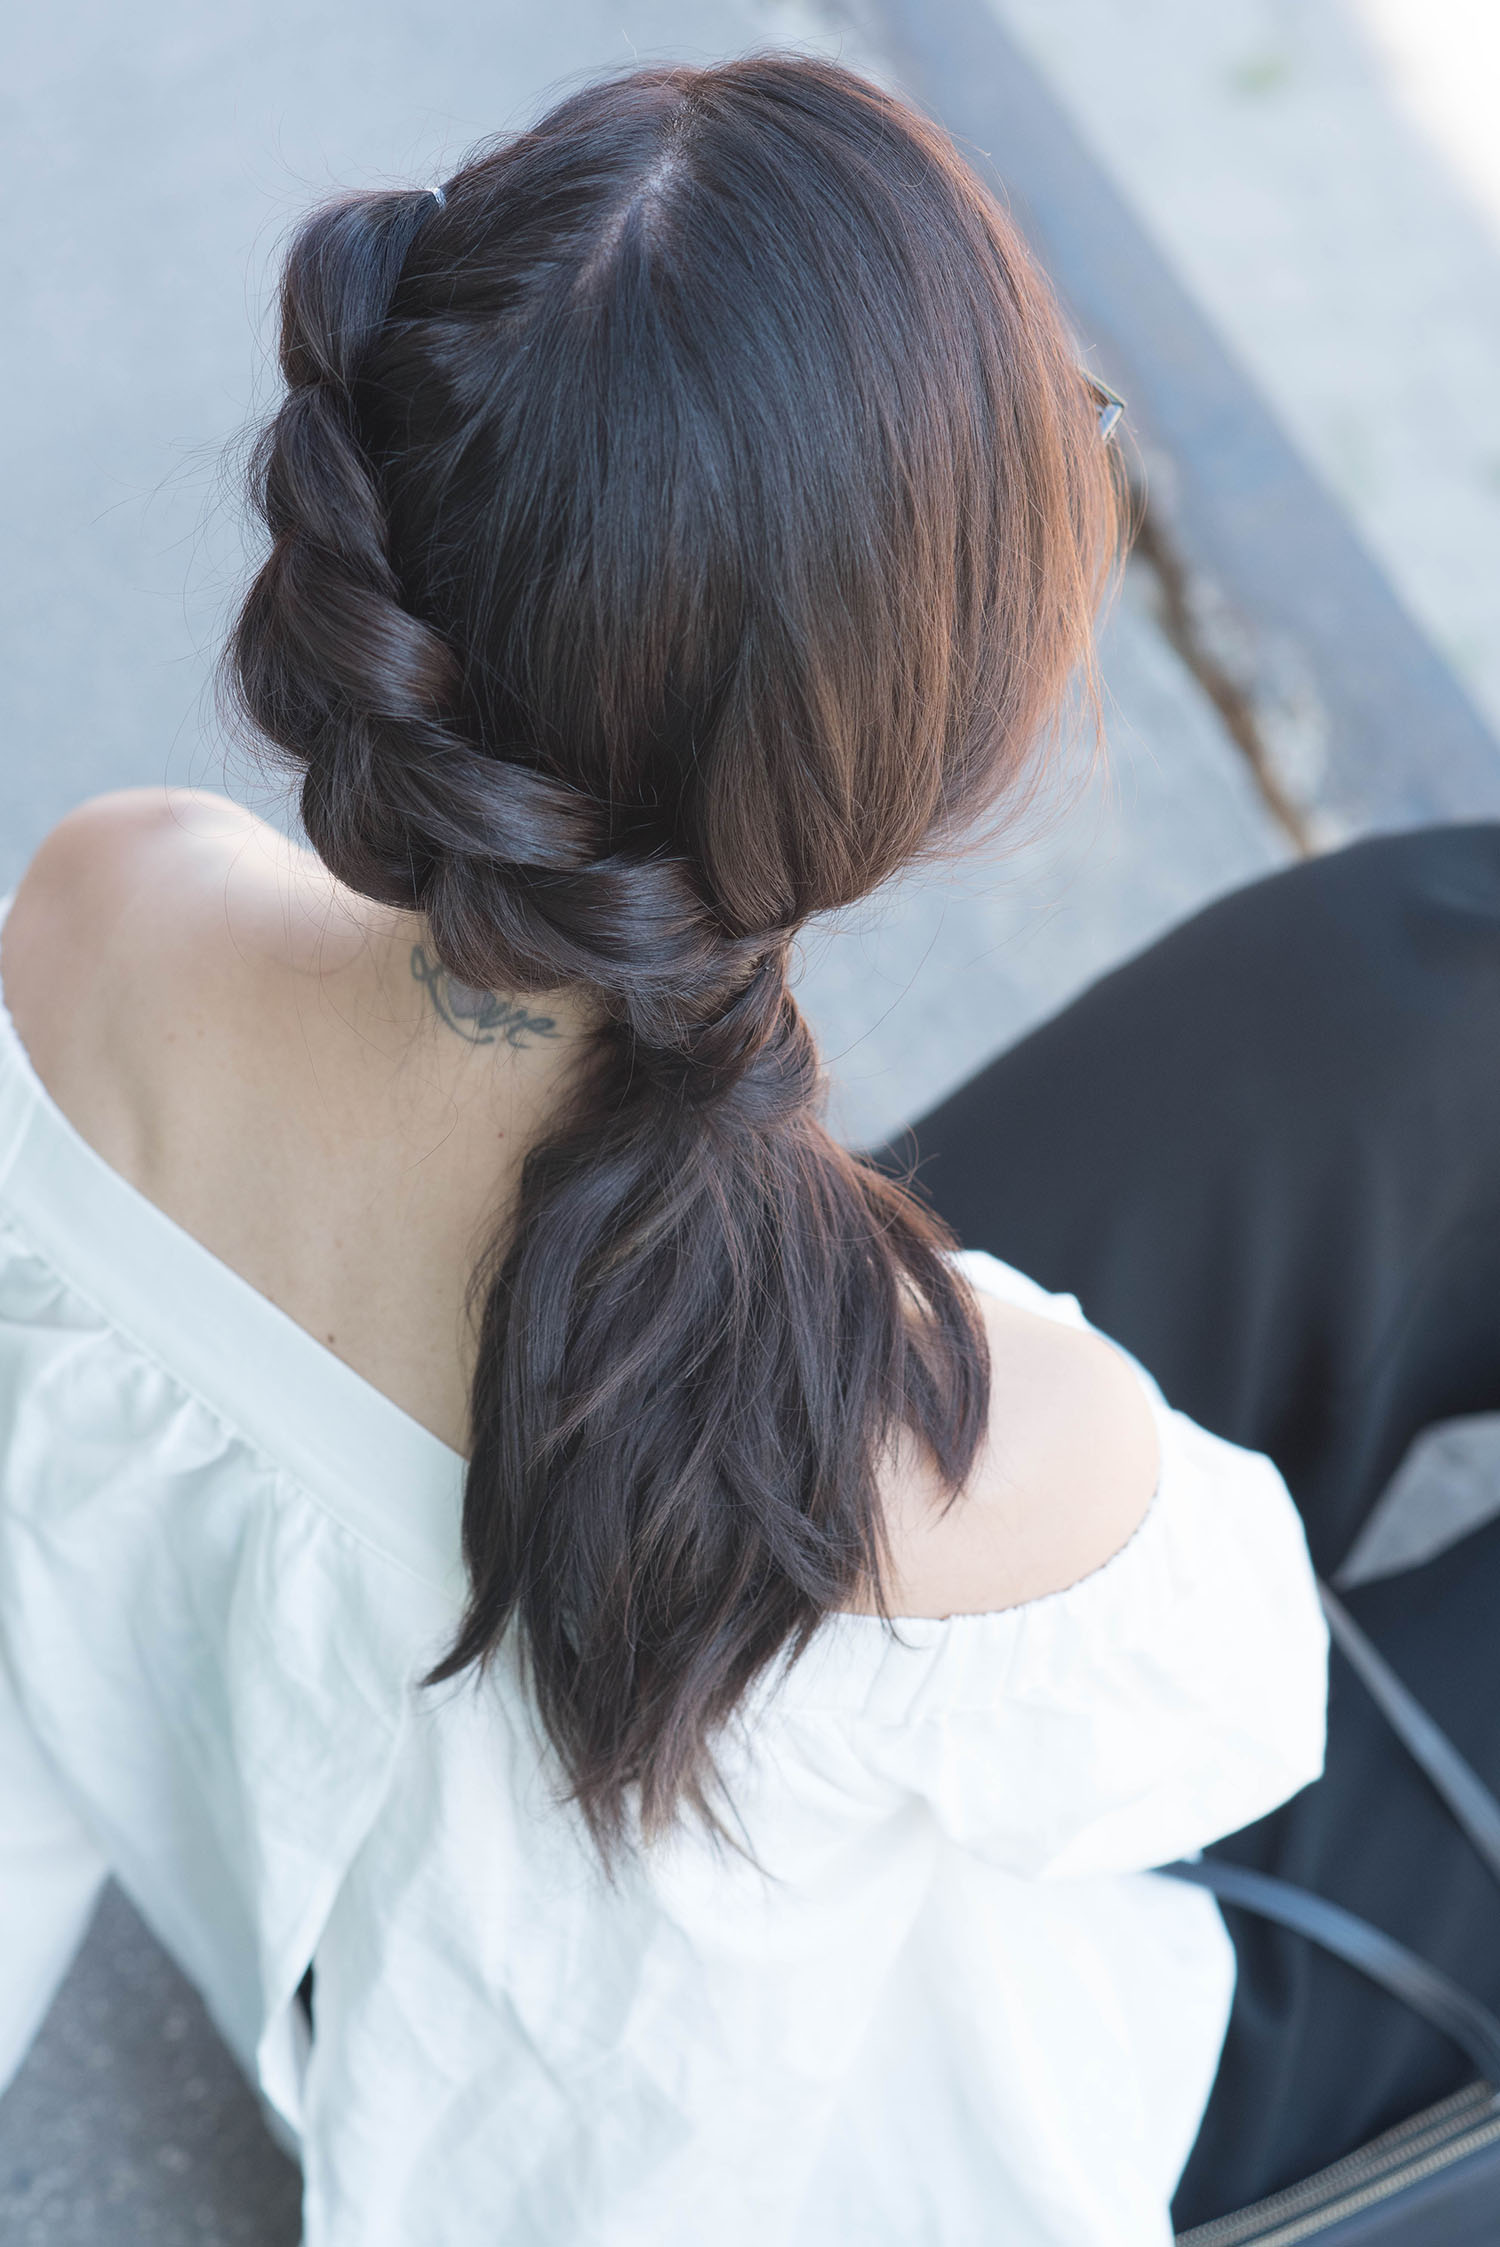 Details of a braided ponytail by Fran Rizzutto on top fashion blogger Cee Fardoe of Coco & Vera